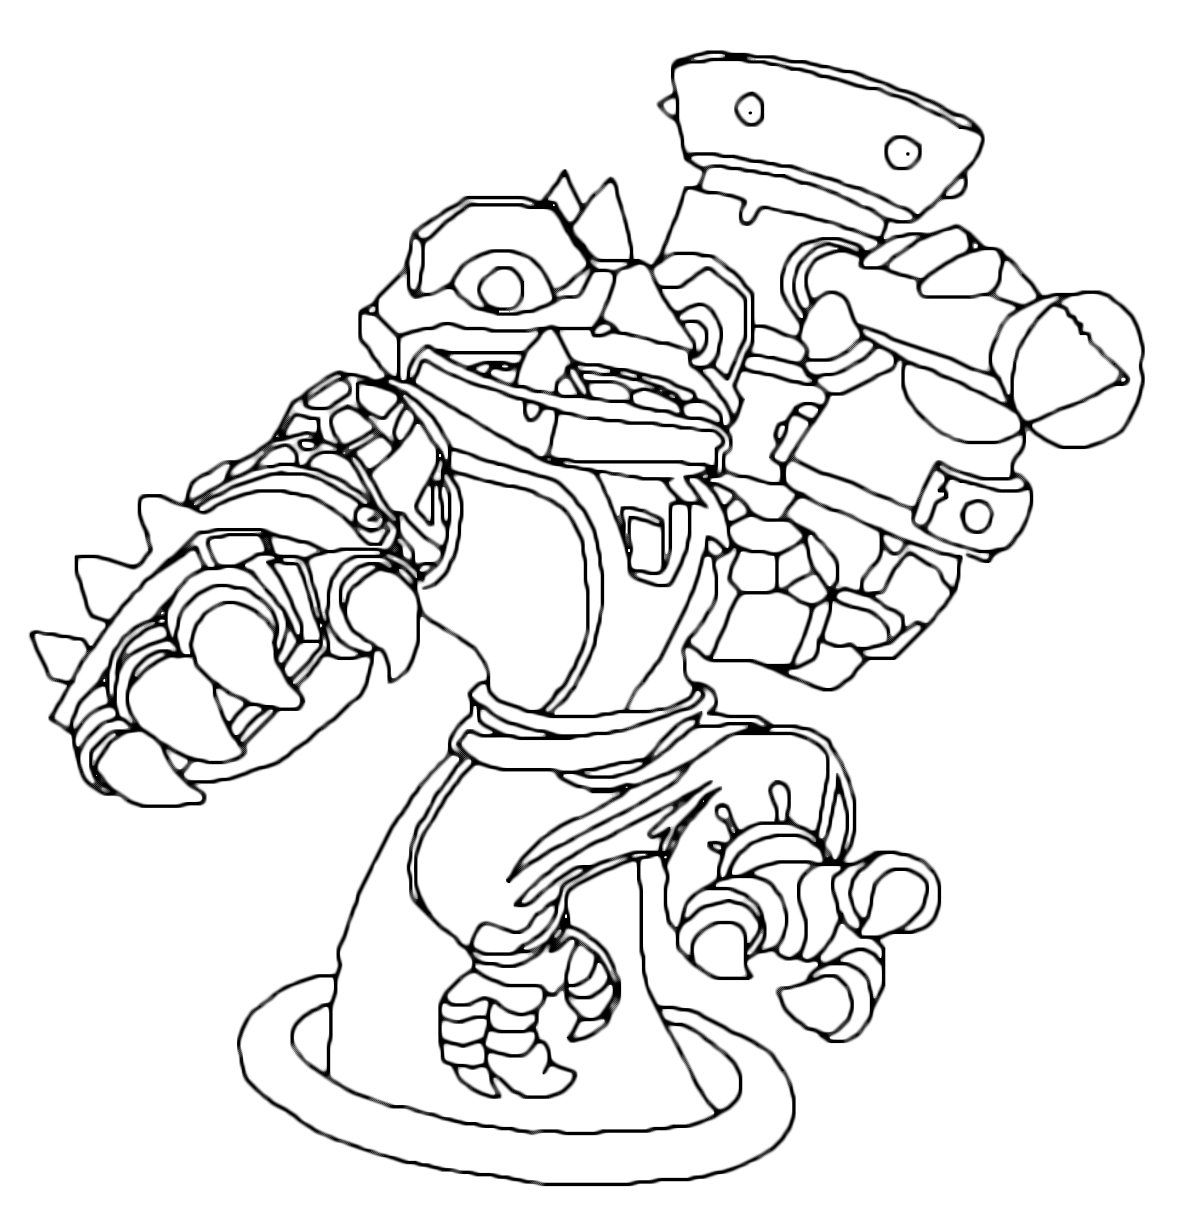 Skylanders - Swap Force - Rubble Loop ready to launch the attack